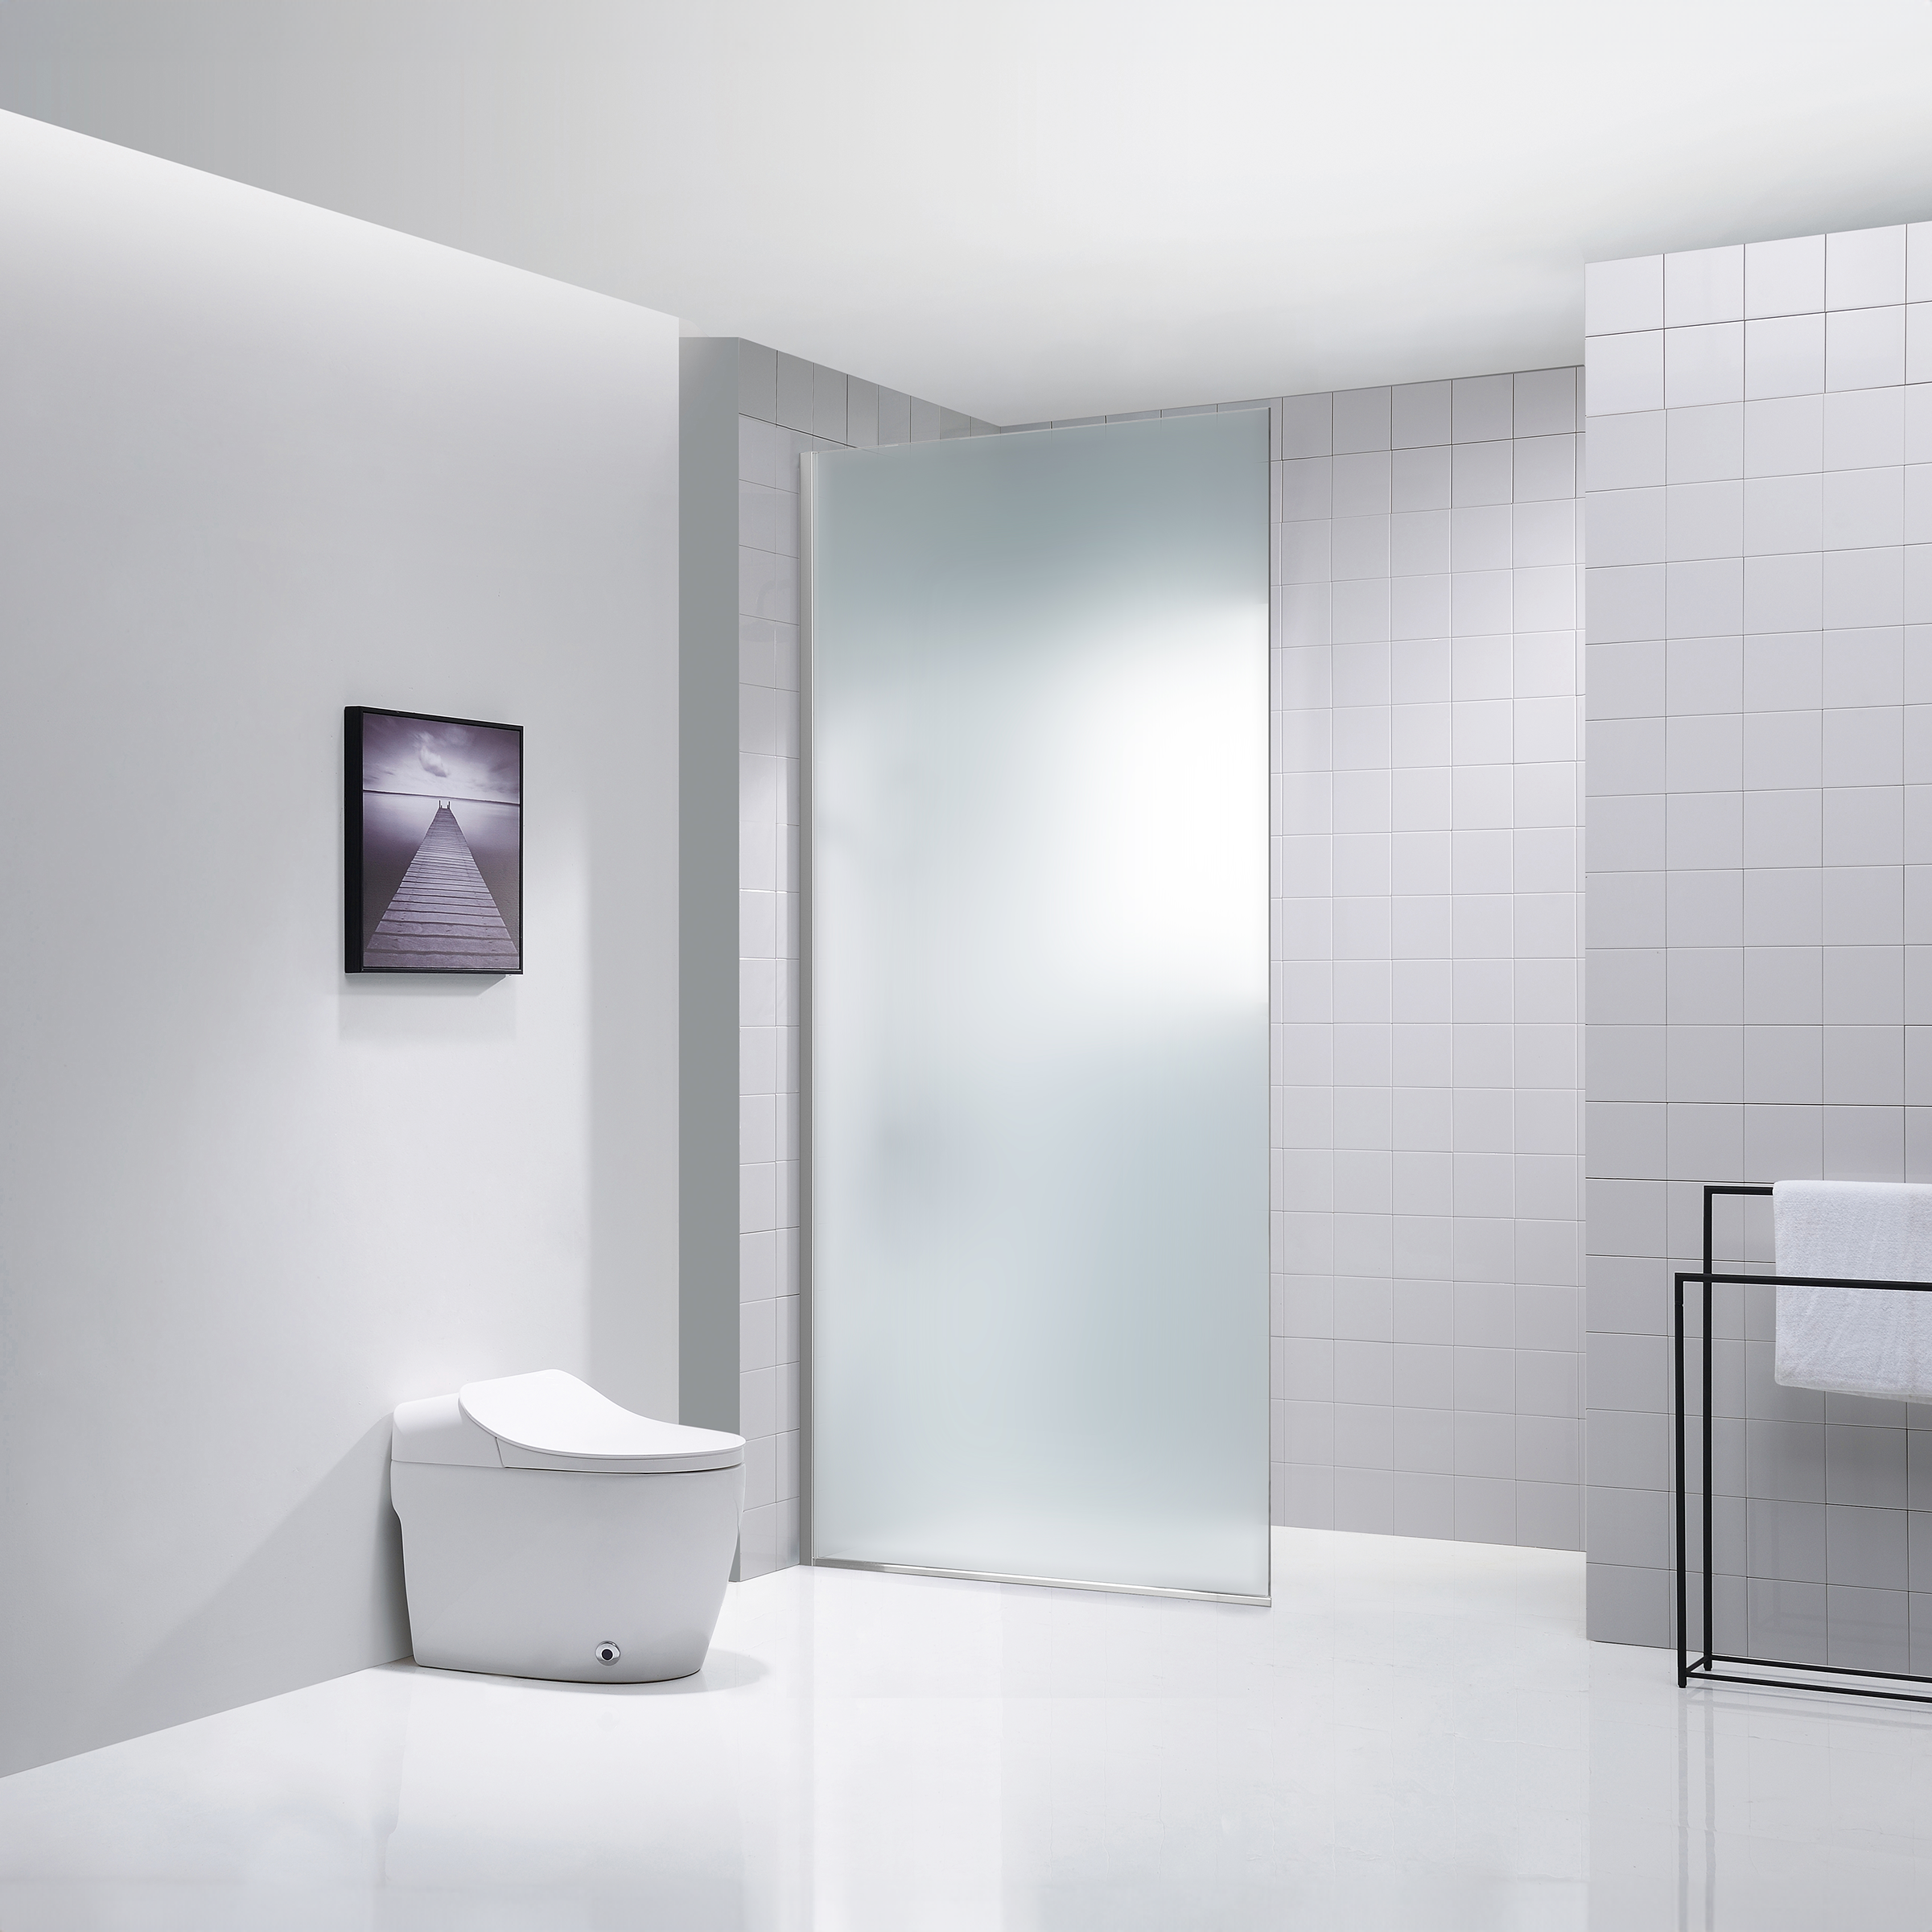 Dreamwerks 35.4"W x 79"H Frameless Fixed Shower Door in Chrome - Available in Clear or Frosted Glass